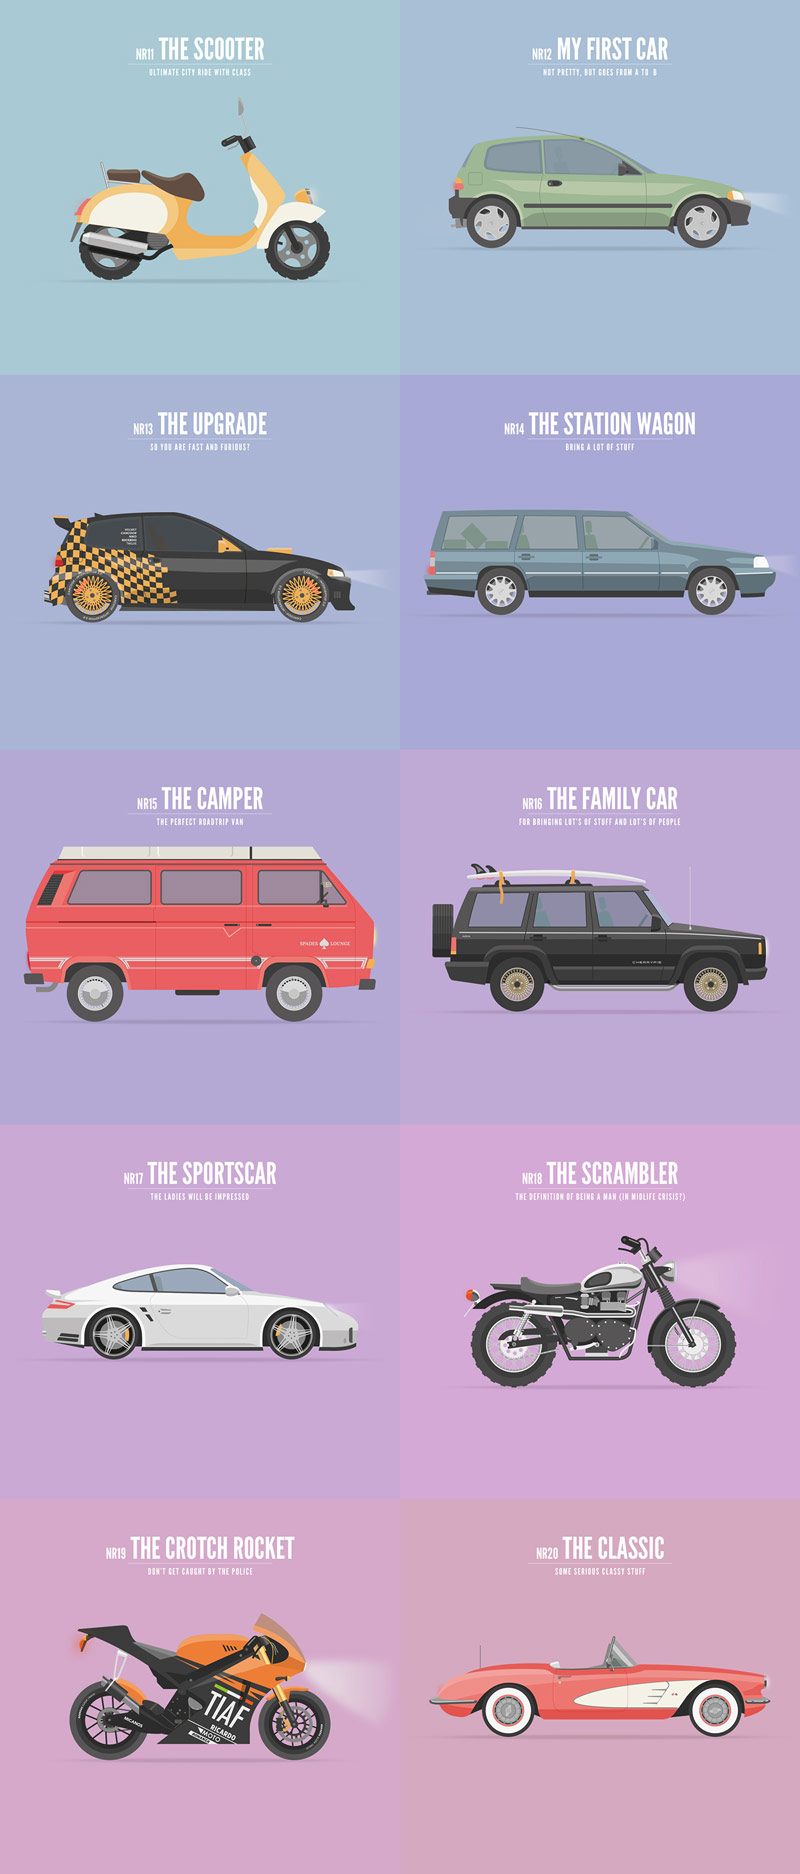 Life on Wheels illustrations (part 2) by Freelance Interactive Designer and Motion Designer Richard Beerens in collaboration with Ronald Mica.